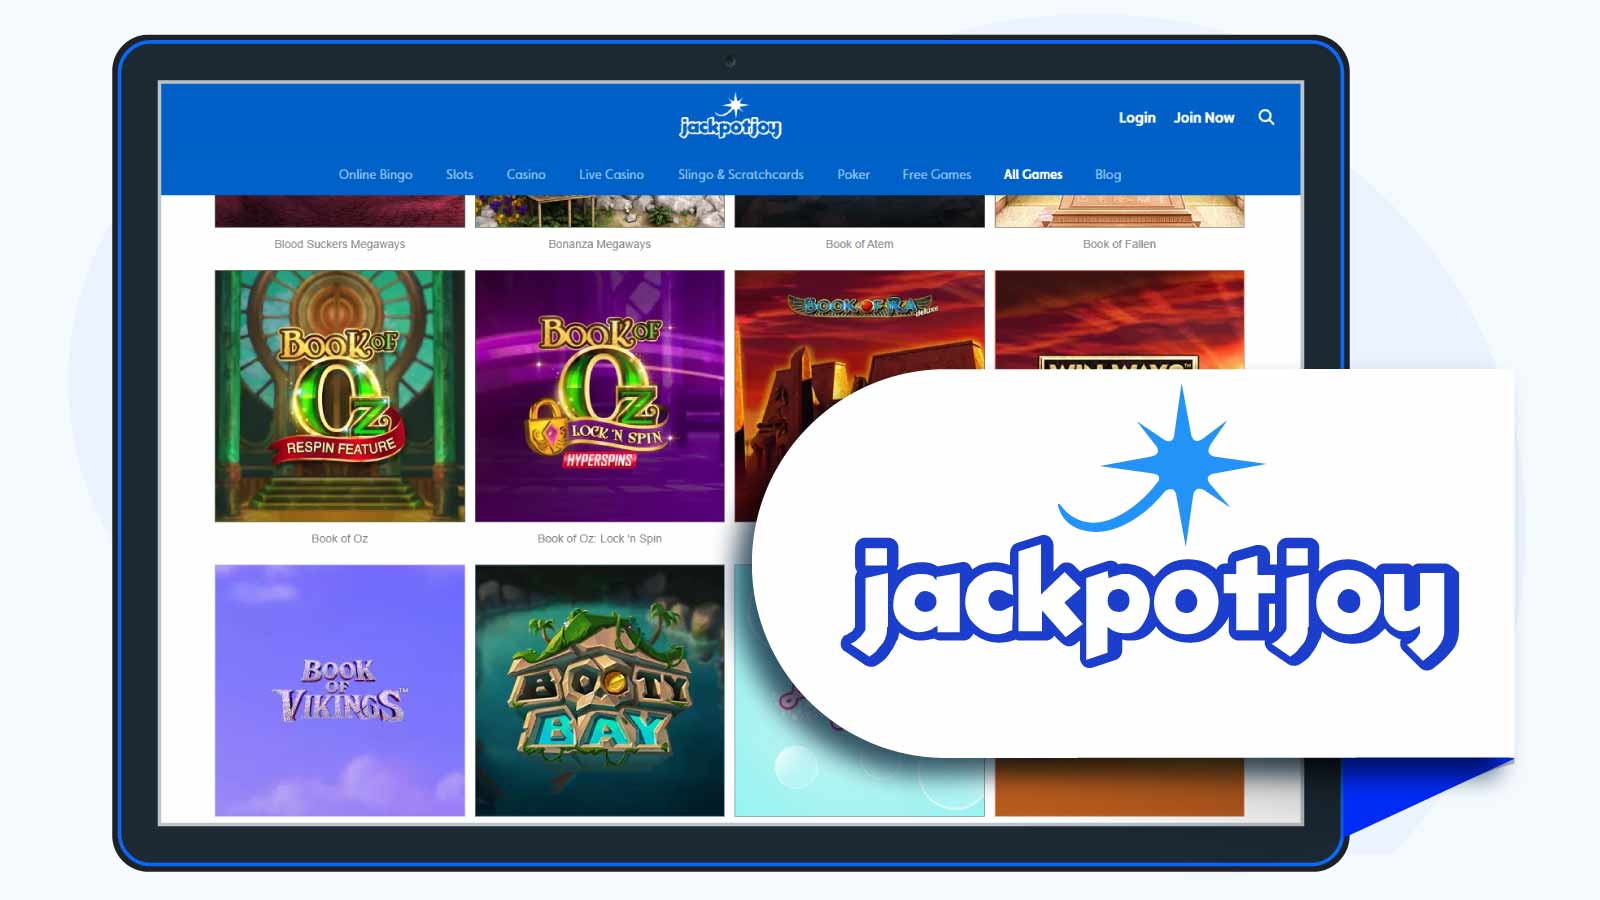 JackpotJoy – Top Option for Trusted Banking Options